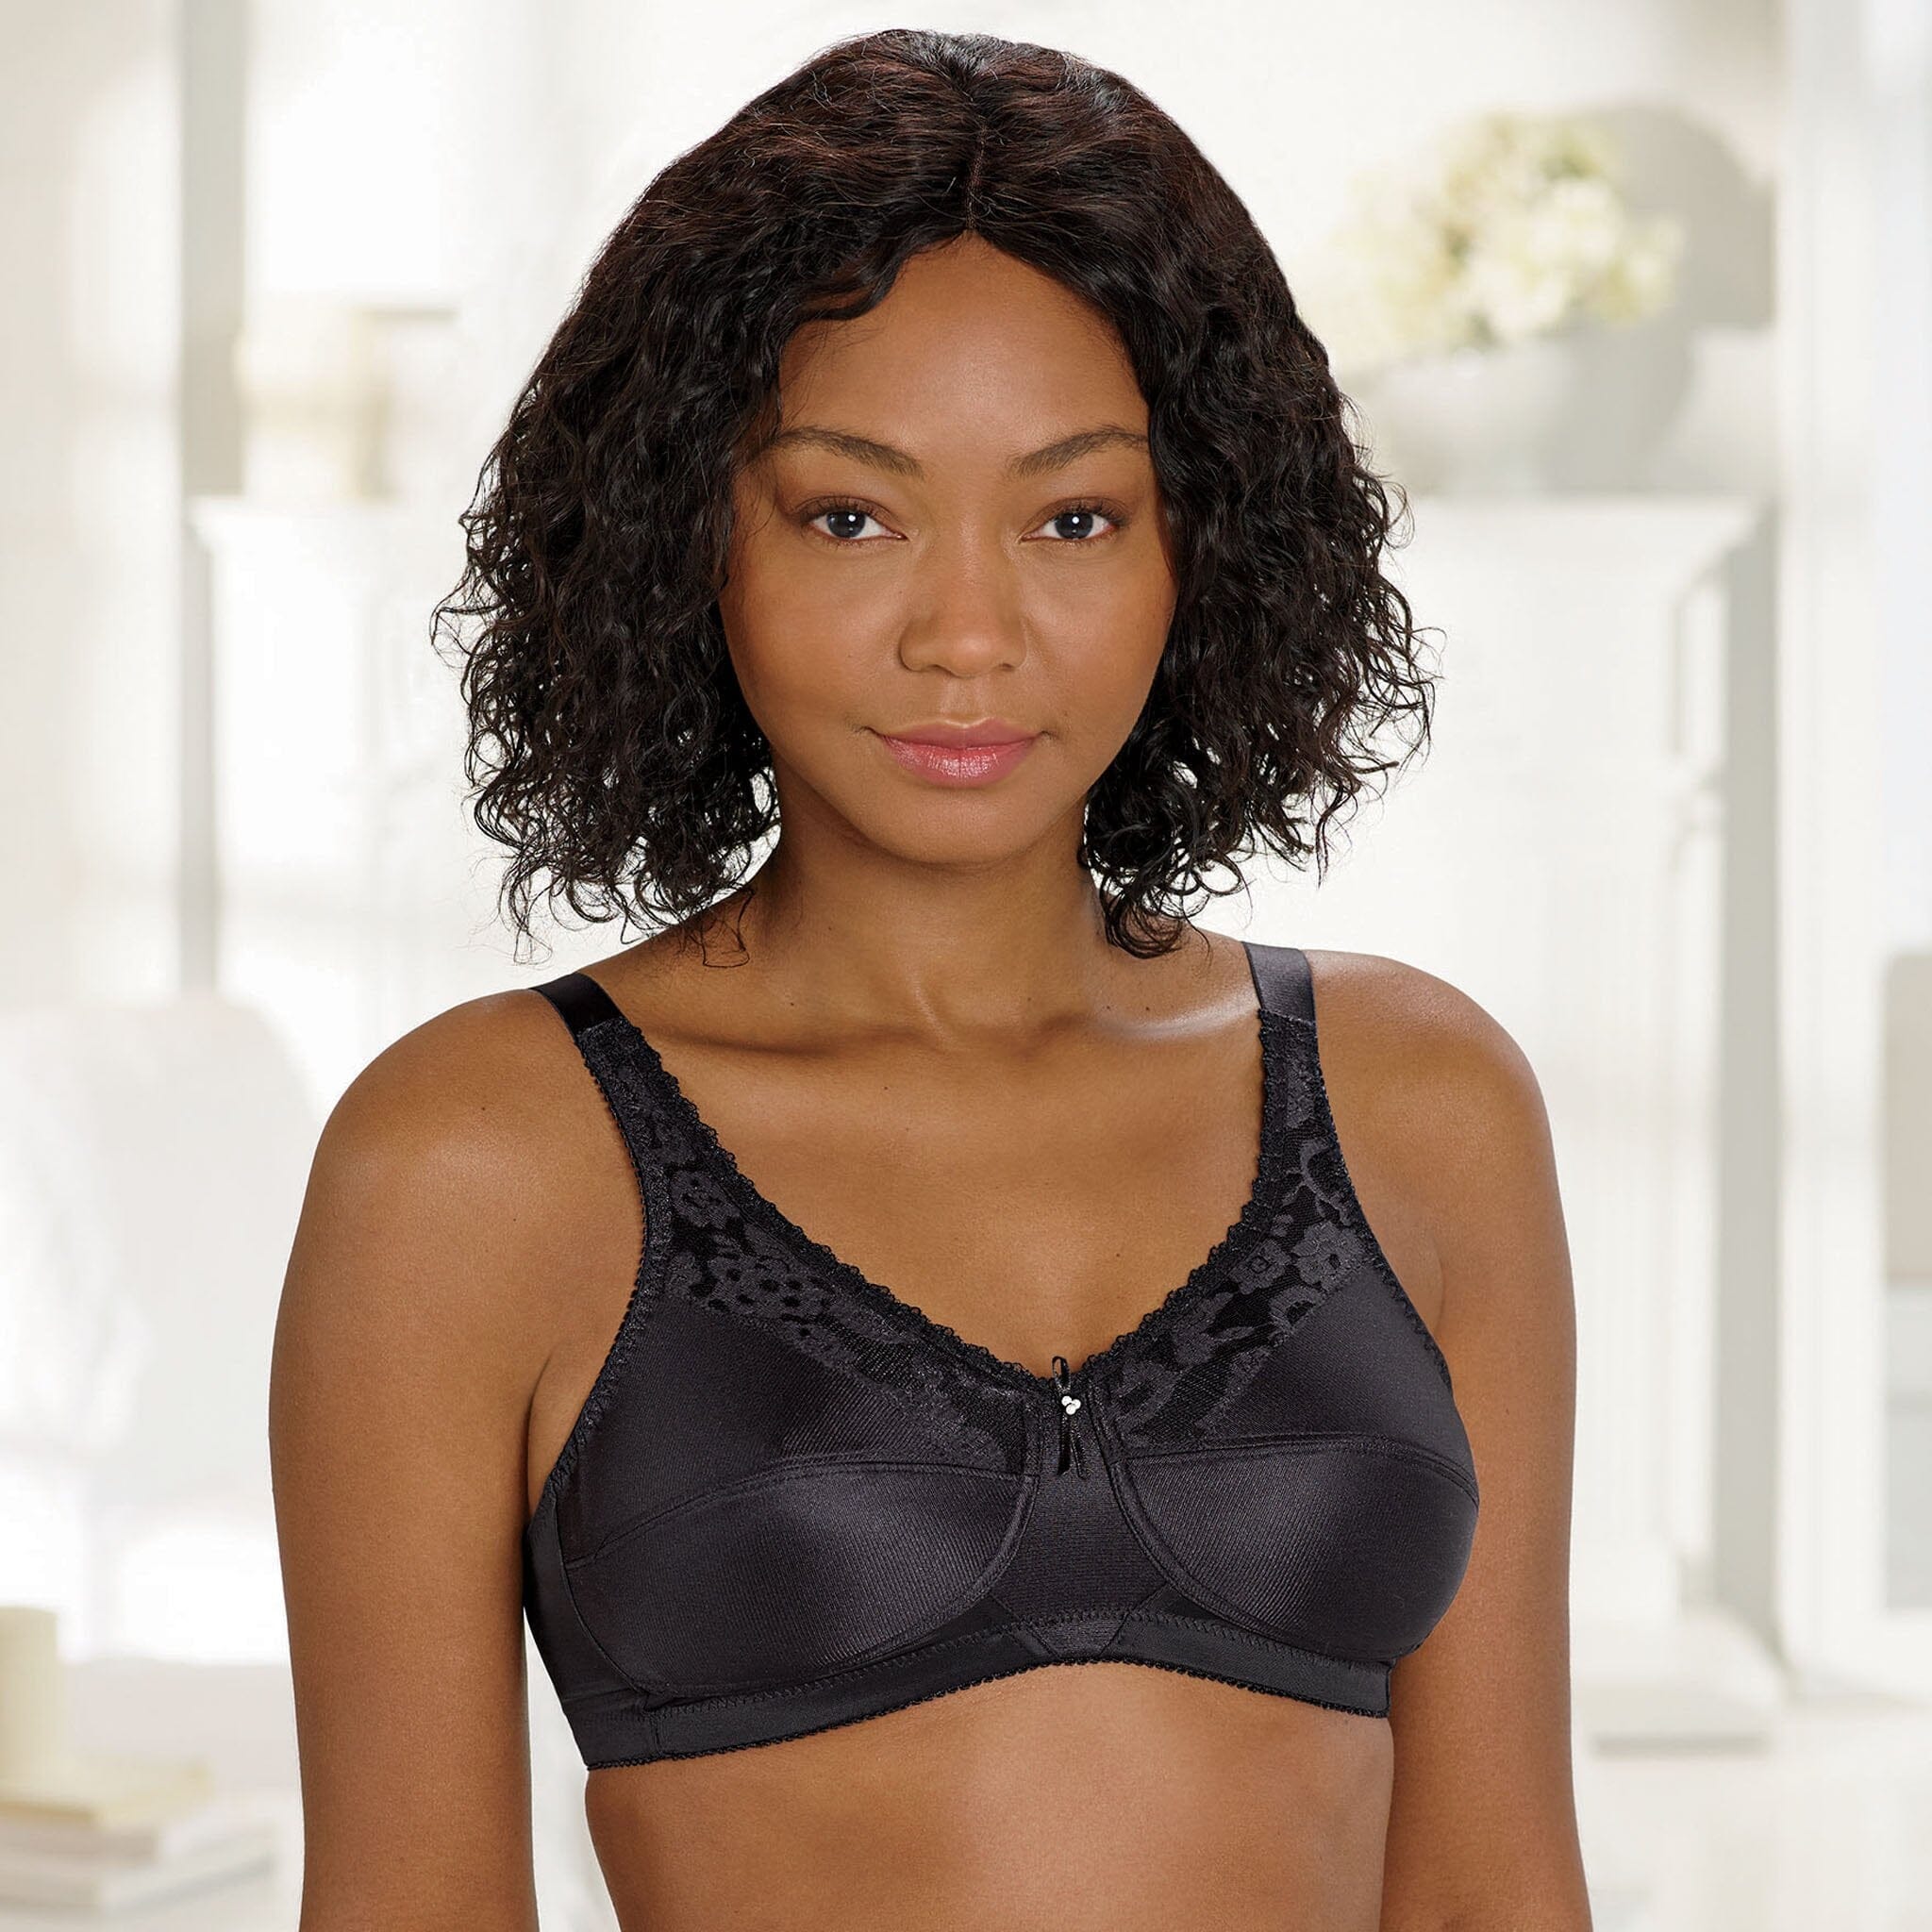 Mastectomy Bra  Bras For Breast Cancer - Breast Prosthesis